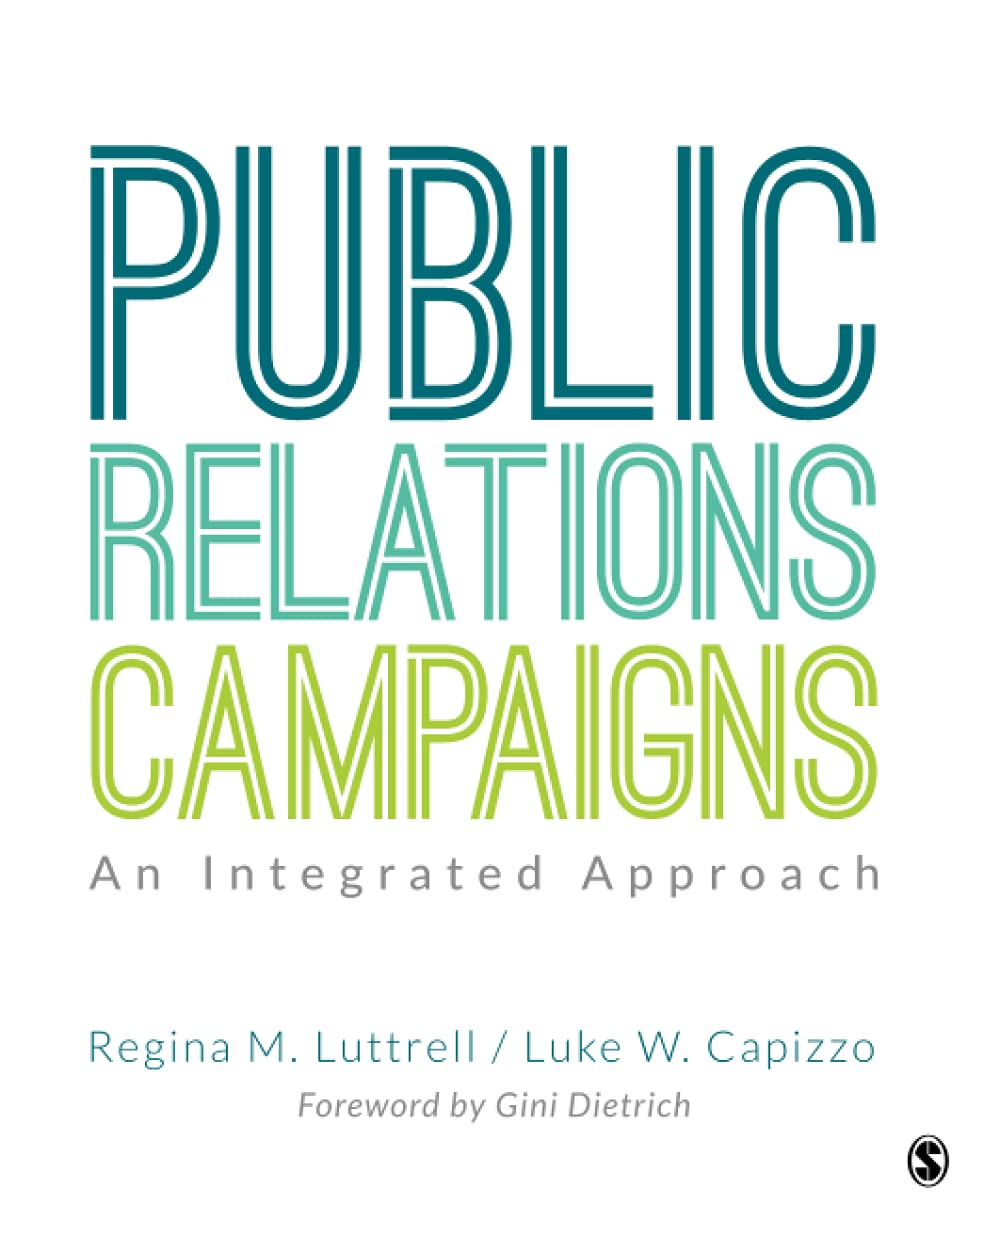 Public Relations Campaigns: An Integrated Approach